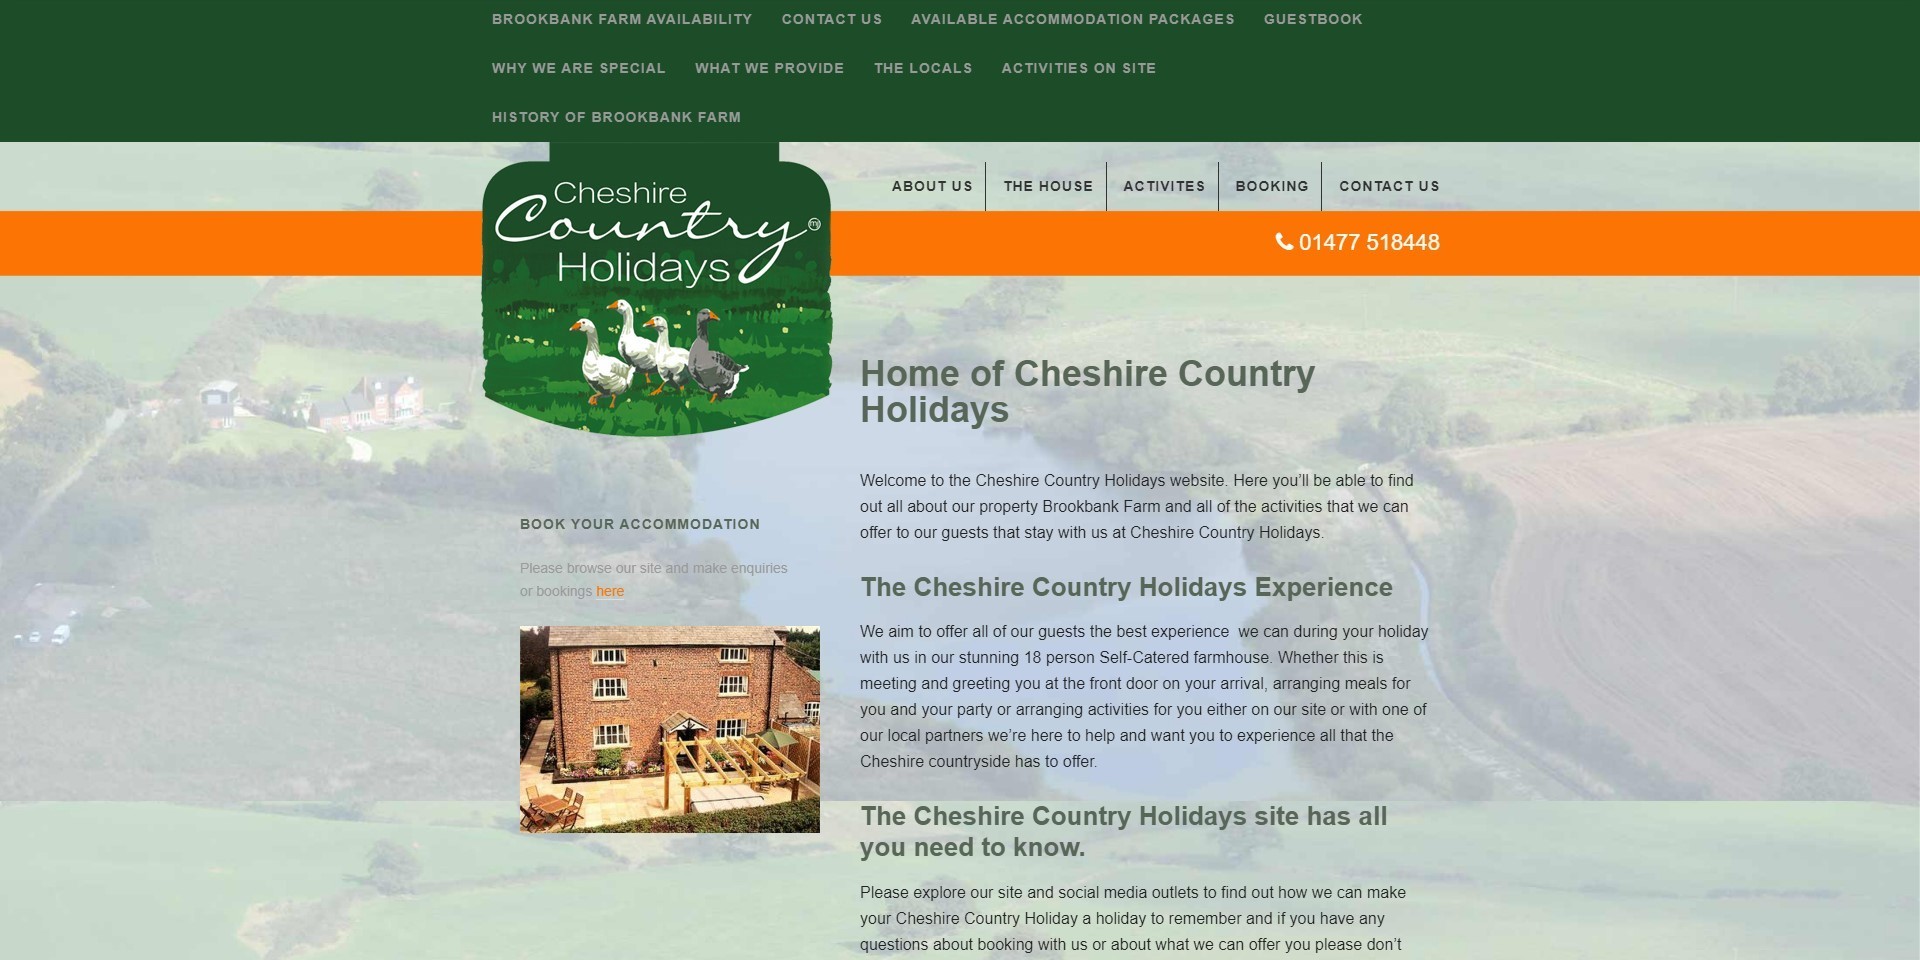 The previous Cheshire Country Holidays website shown on desktop